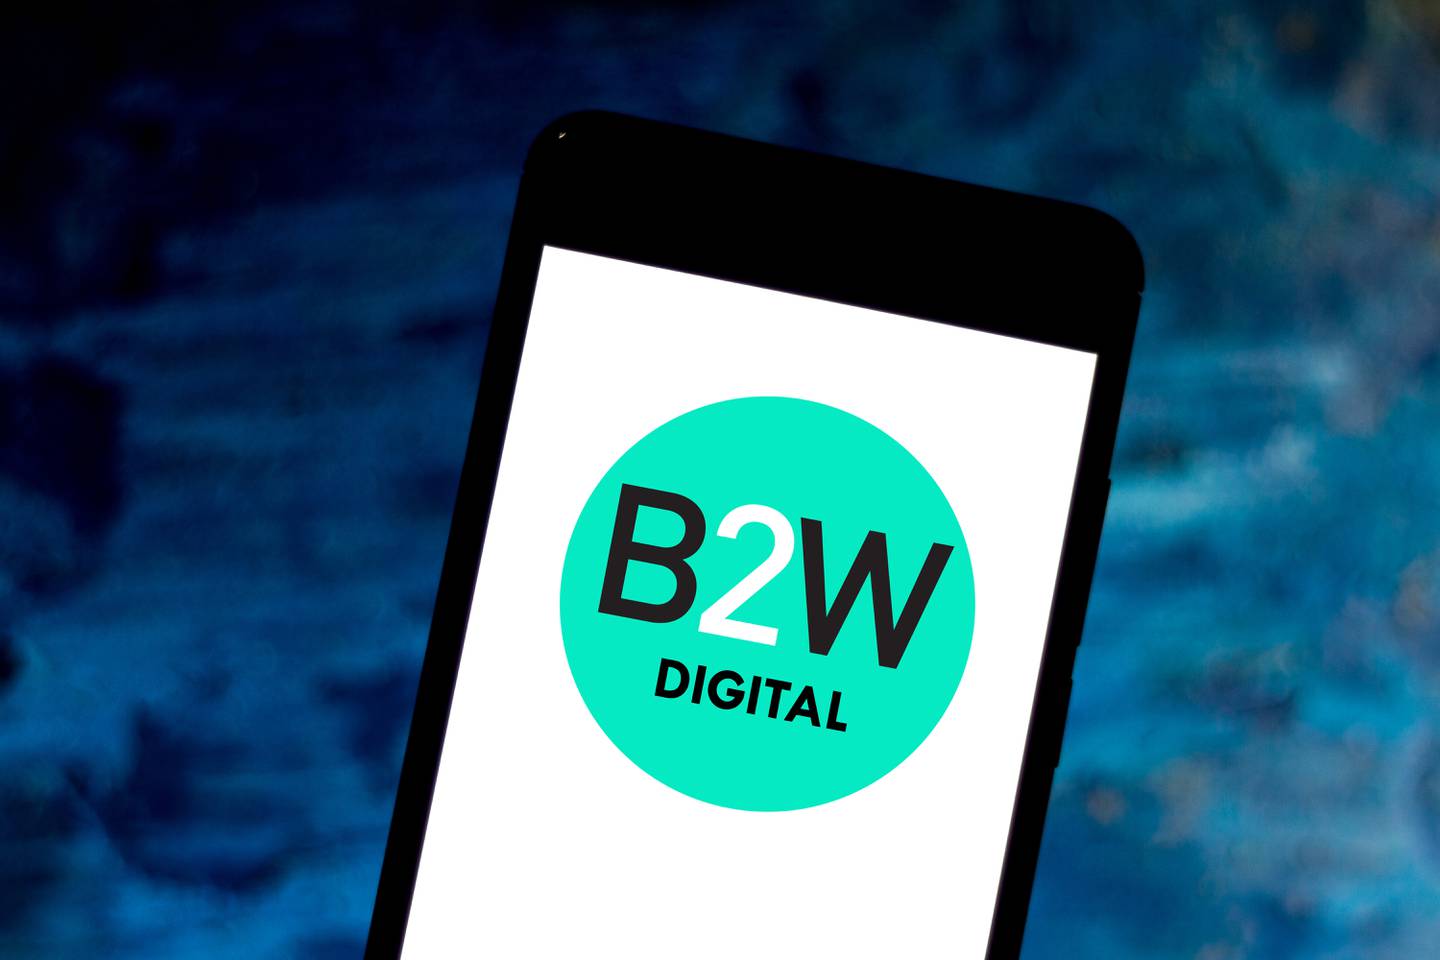 The B2W logo displayed on a smartphone. Shutterstock